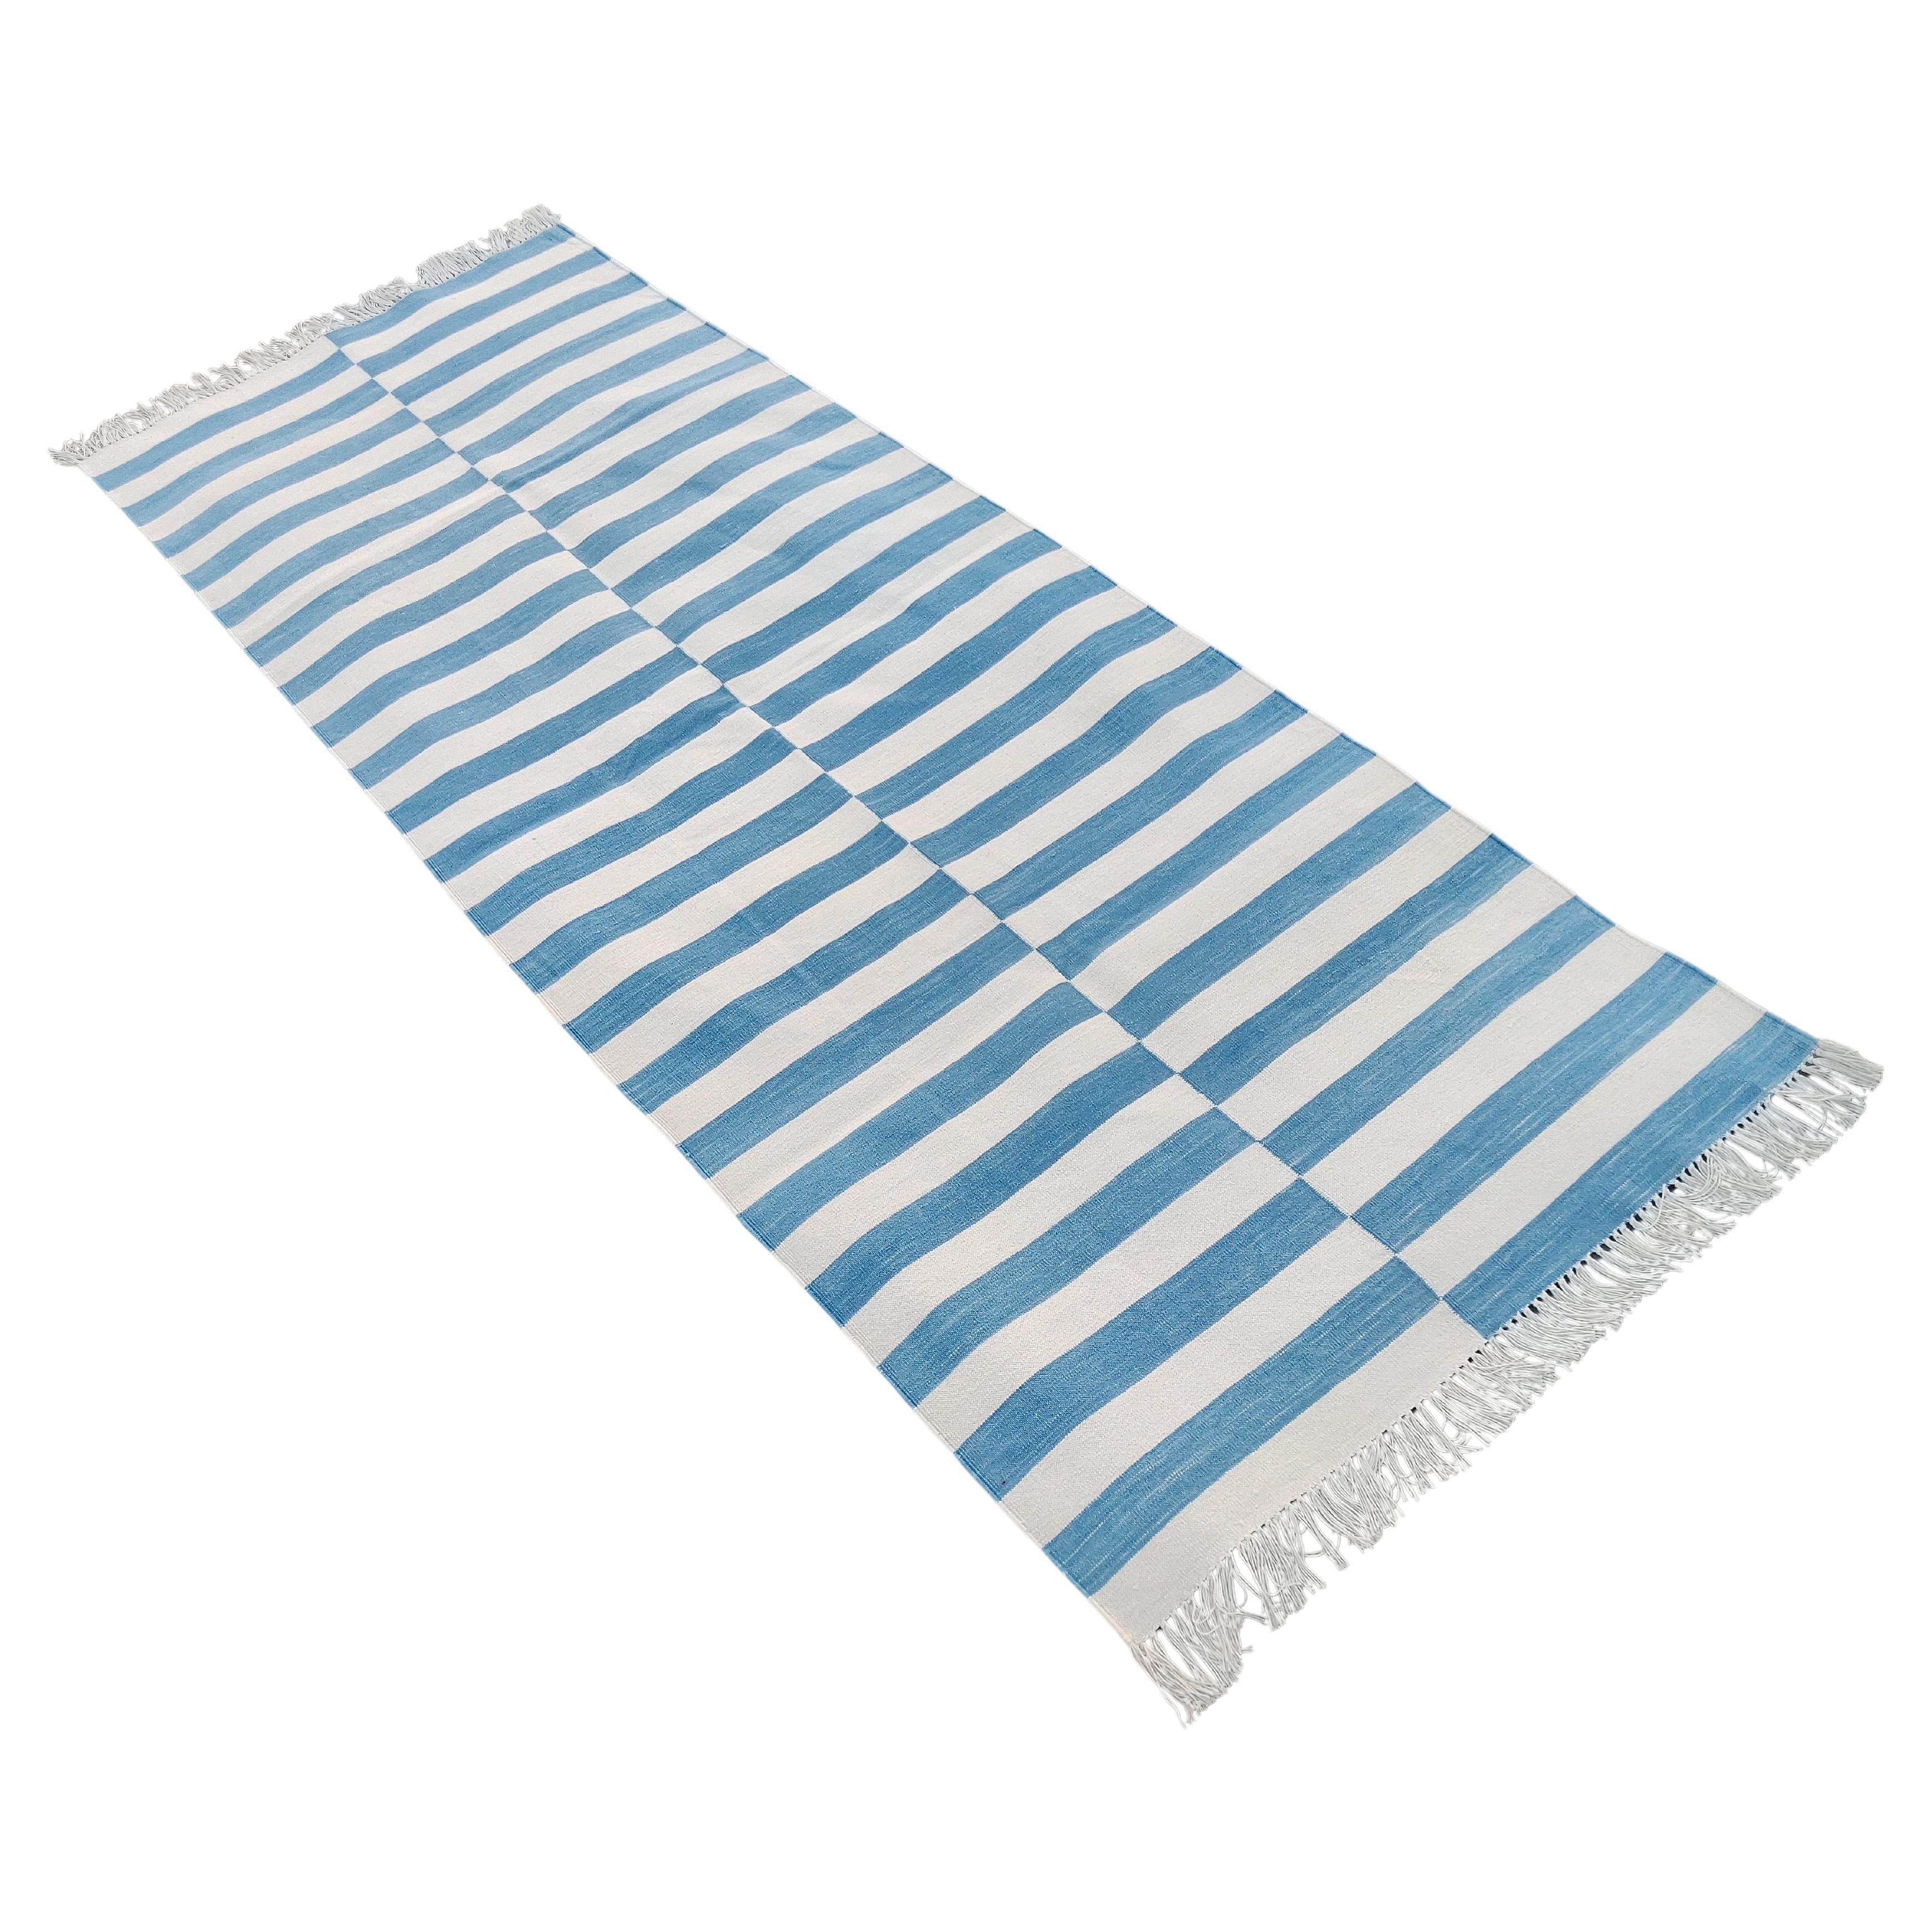 Handmade Cotton Area Flat Weave Runner, 2.5x7 Blue, White Striped Indian Dhurrie For Sale